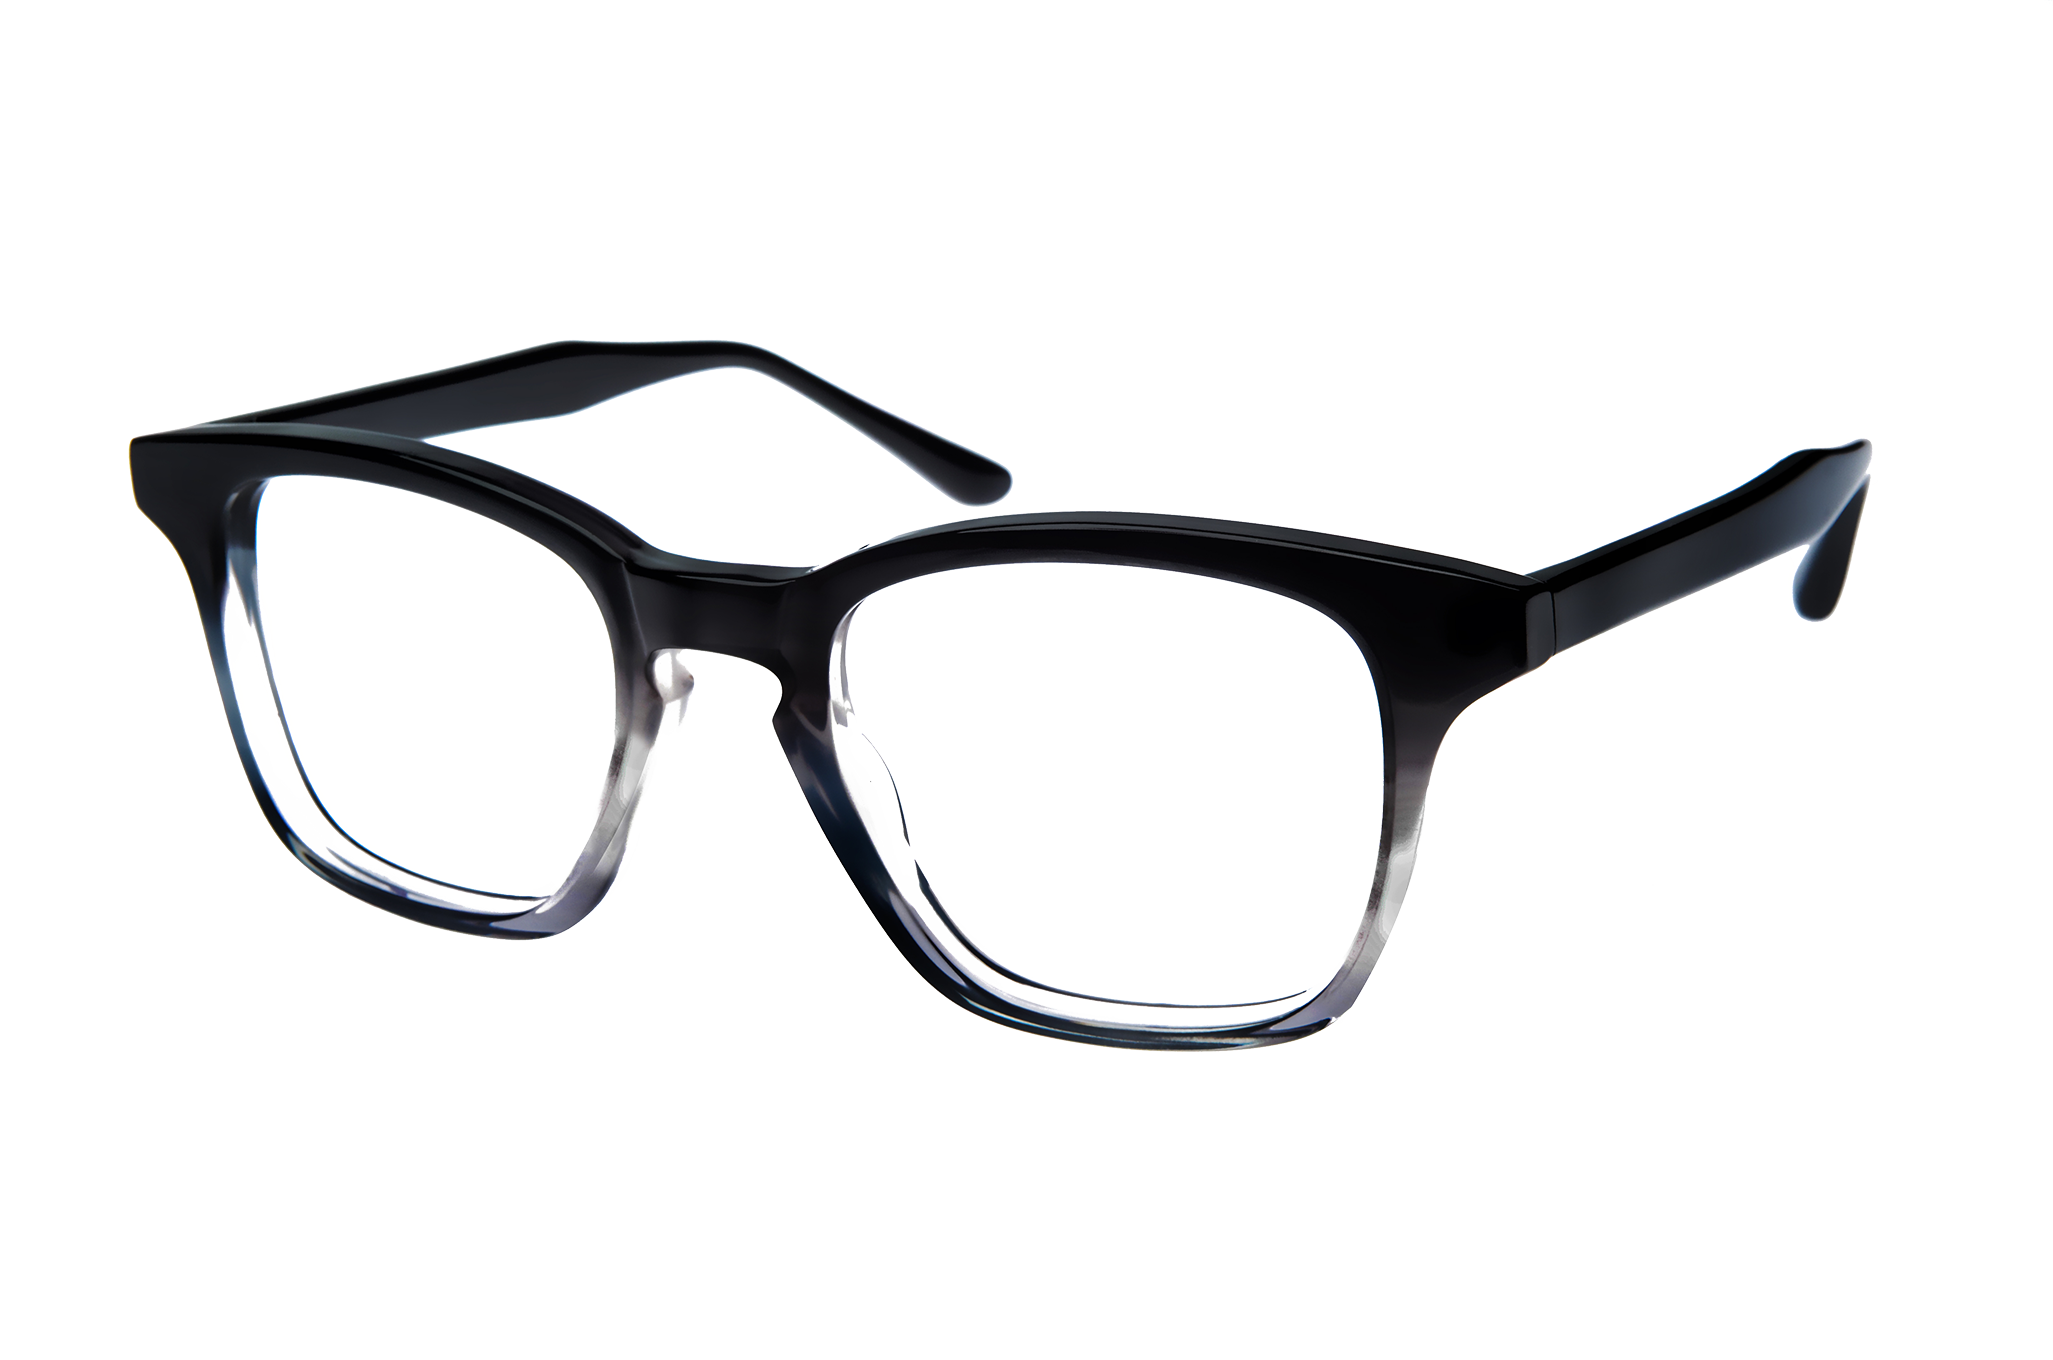 Download Glasses Png Image For Free